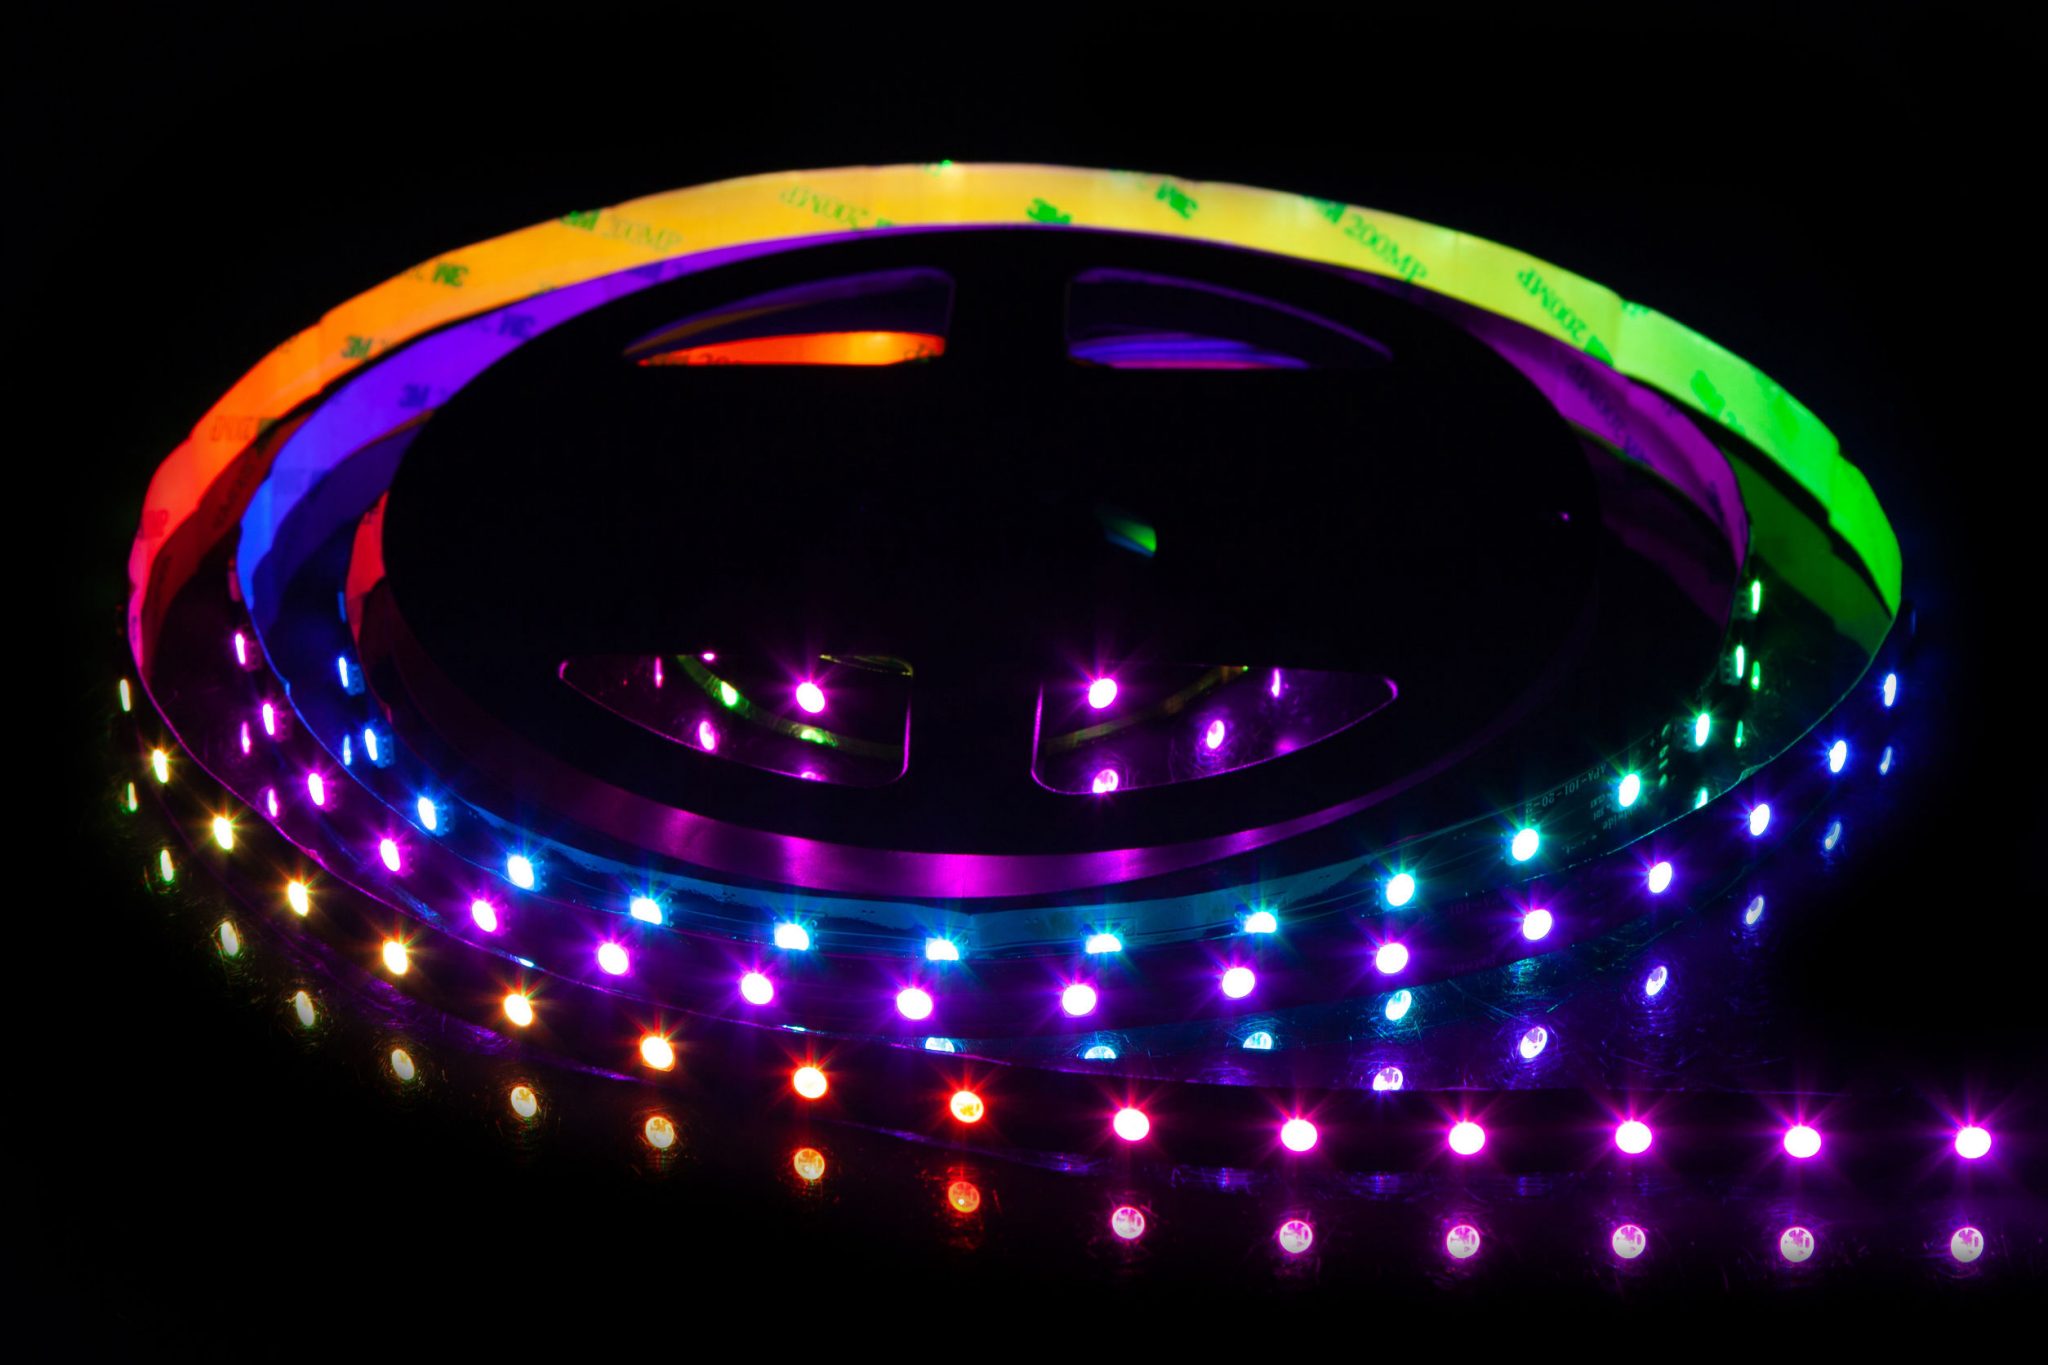 Incentive reign Oswald What are addressable RGB LEDs? | Vista Manufacturing